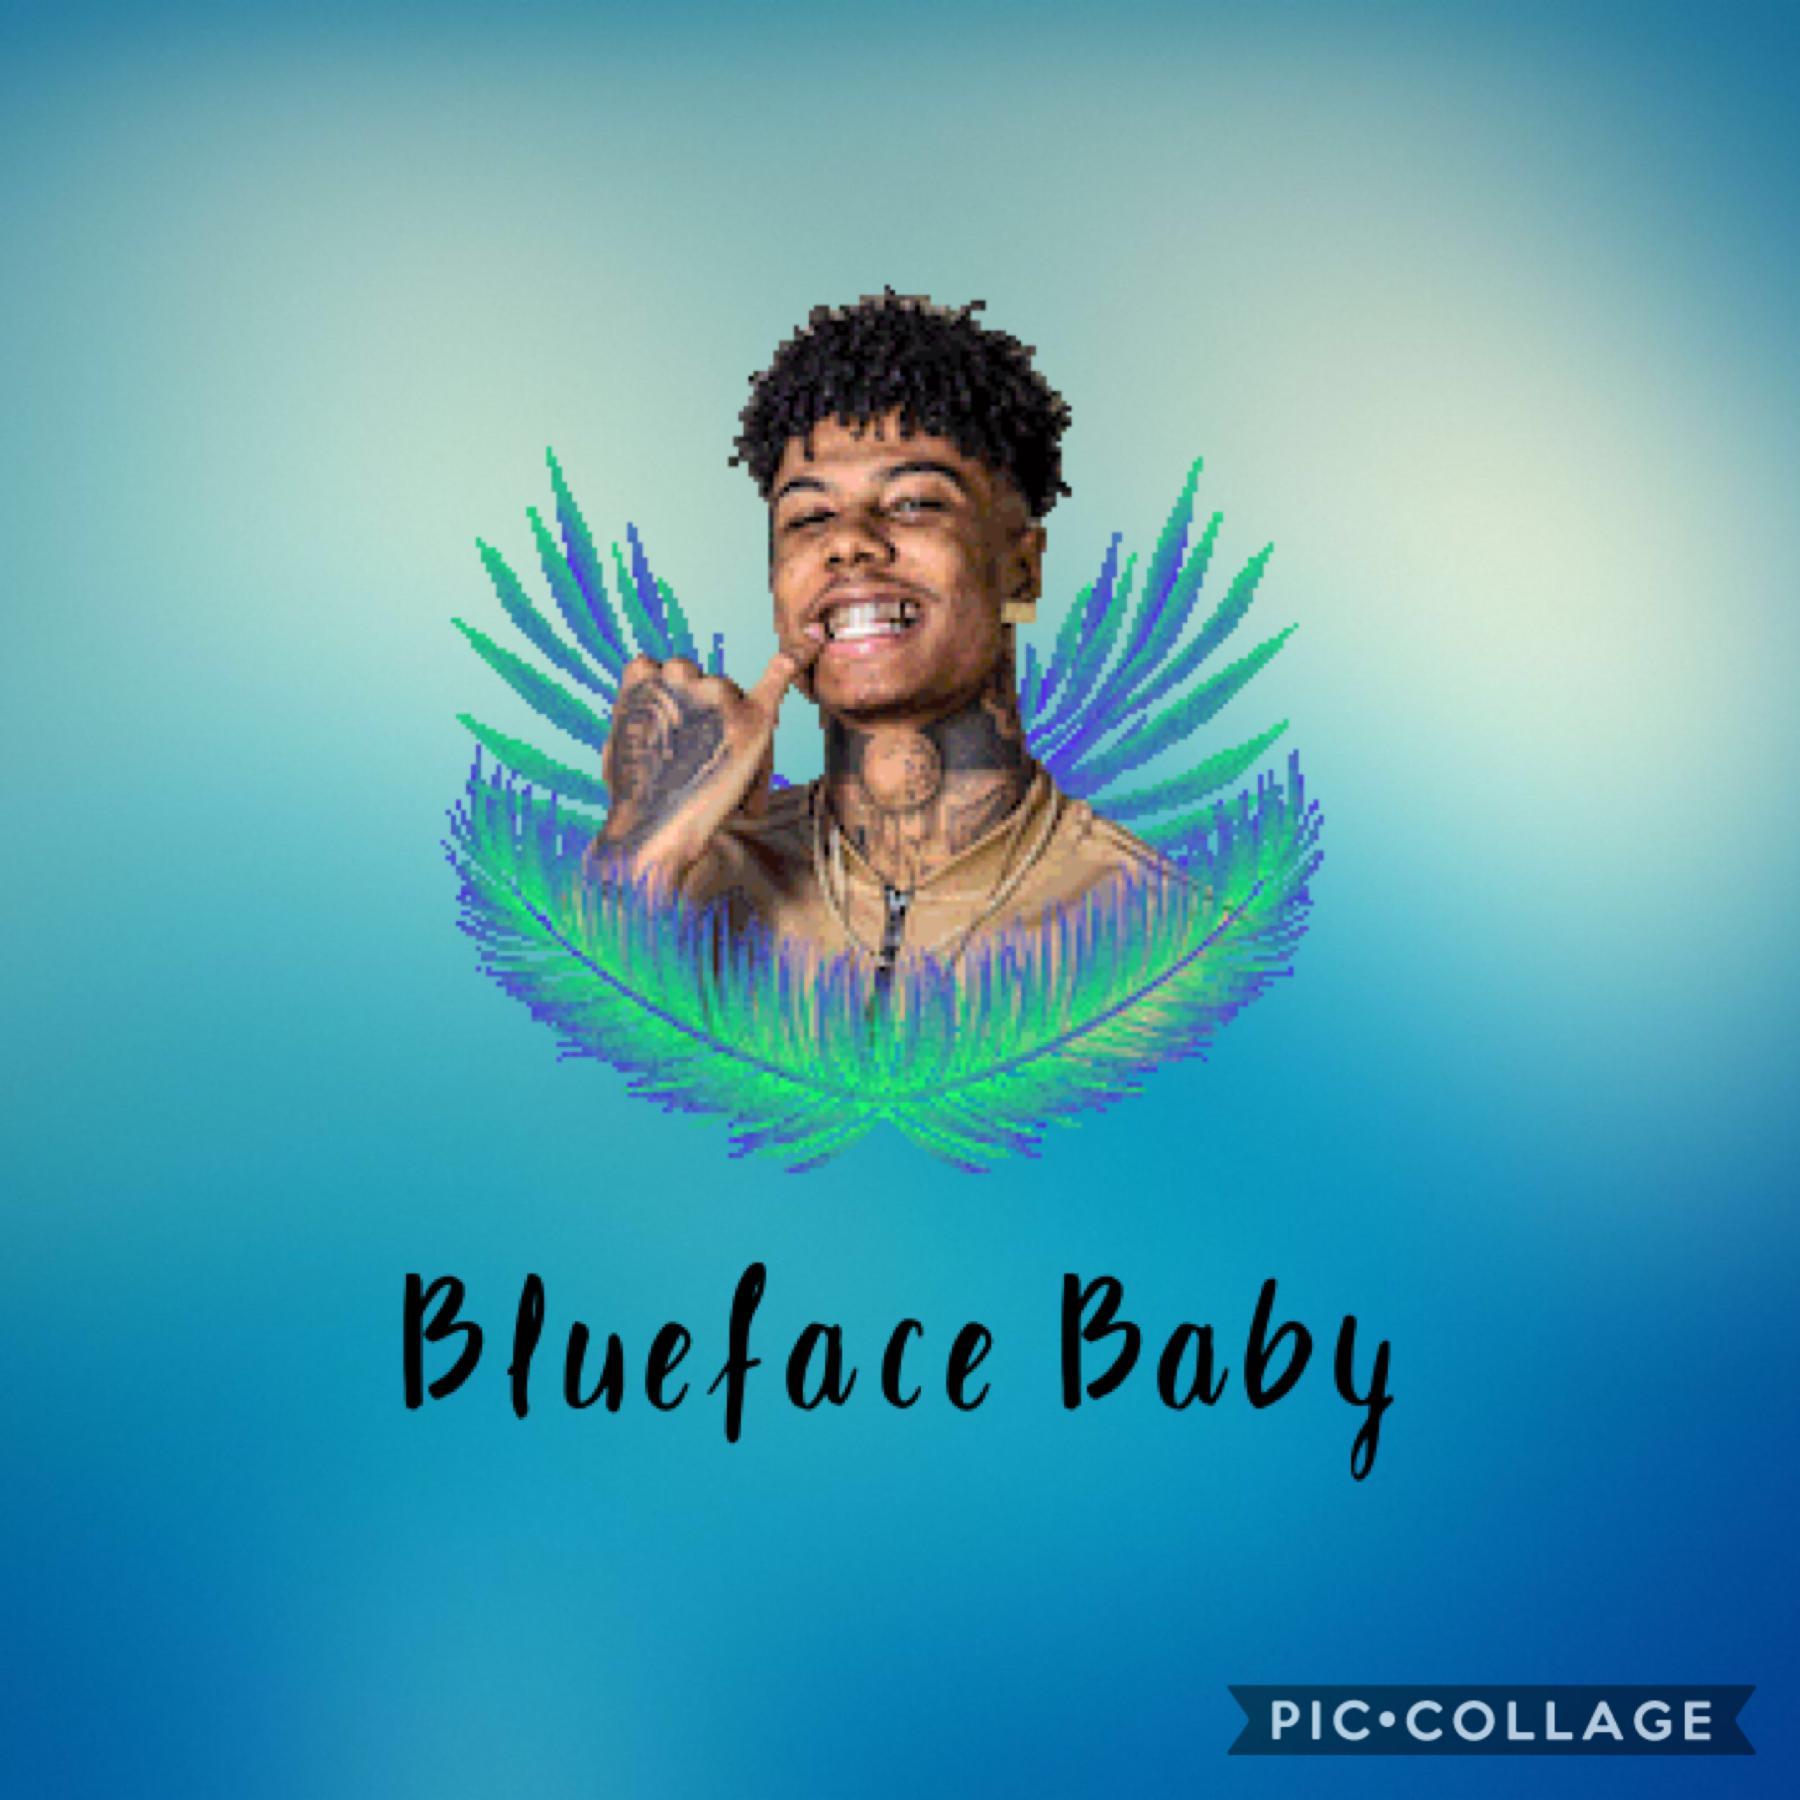 Blueface 

I was bored lol 